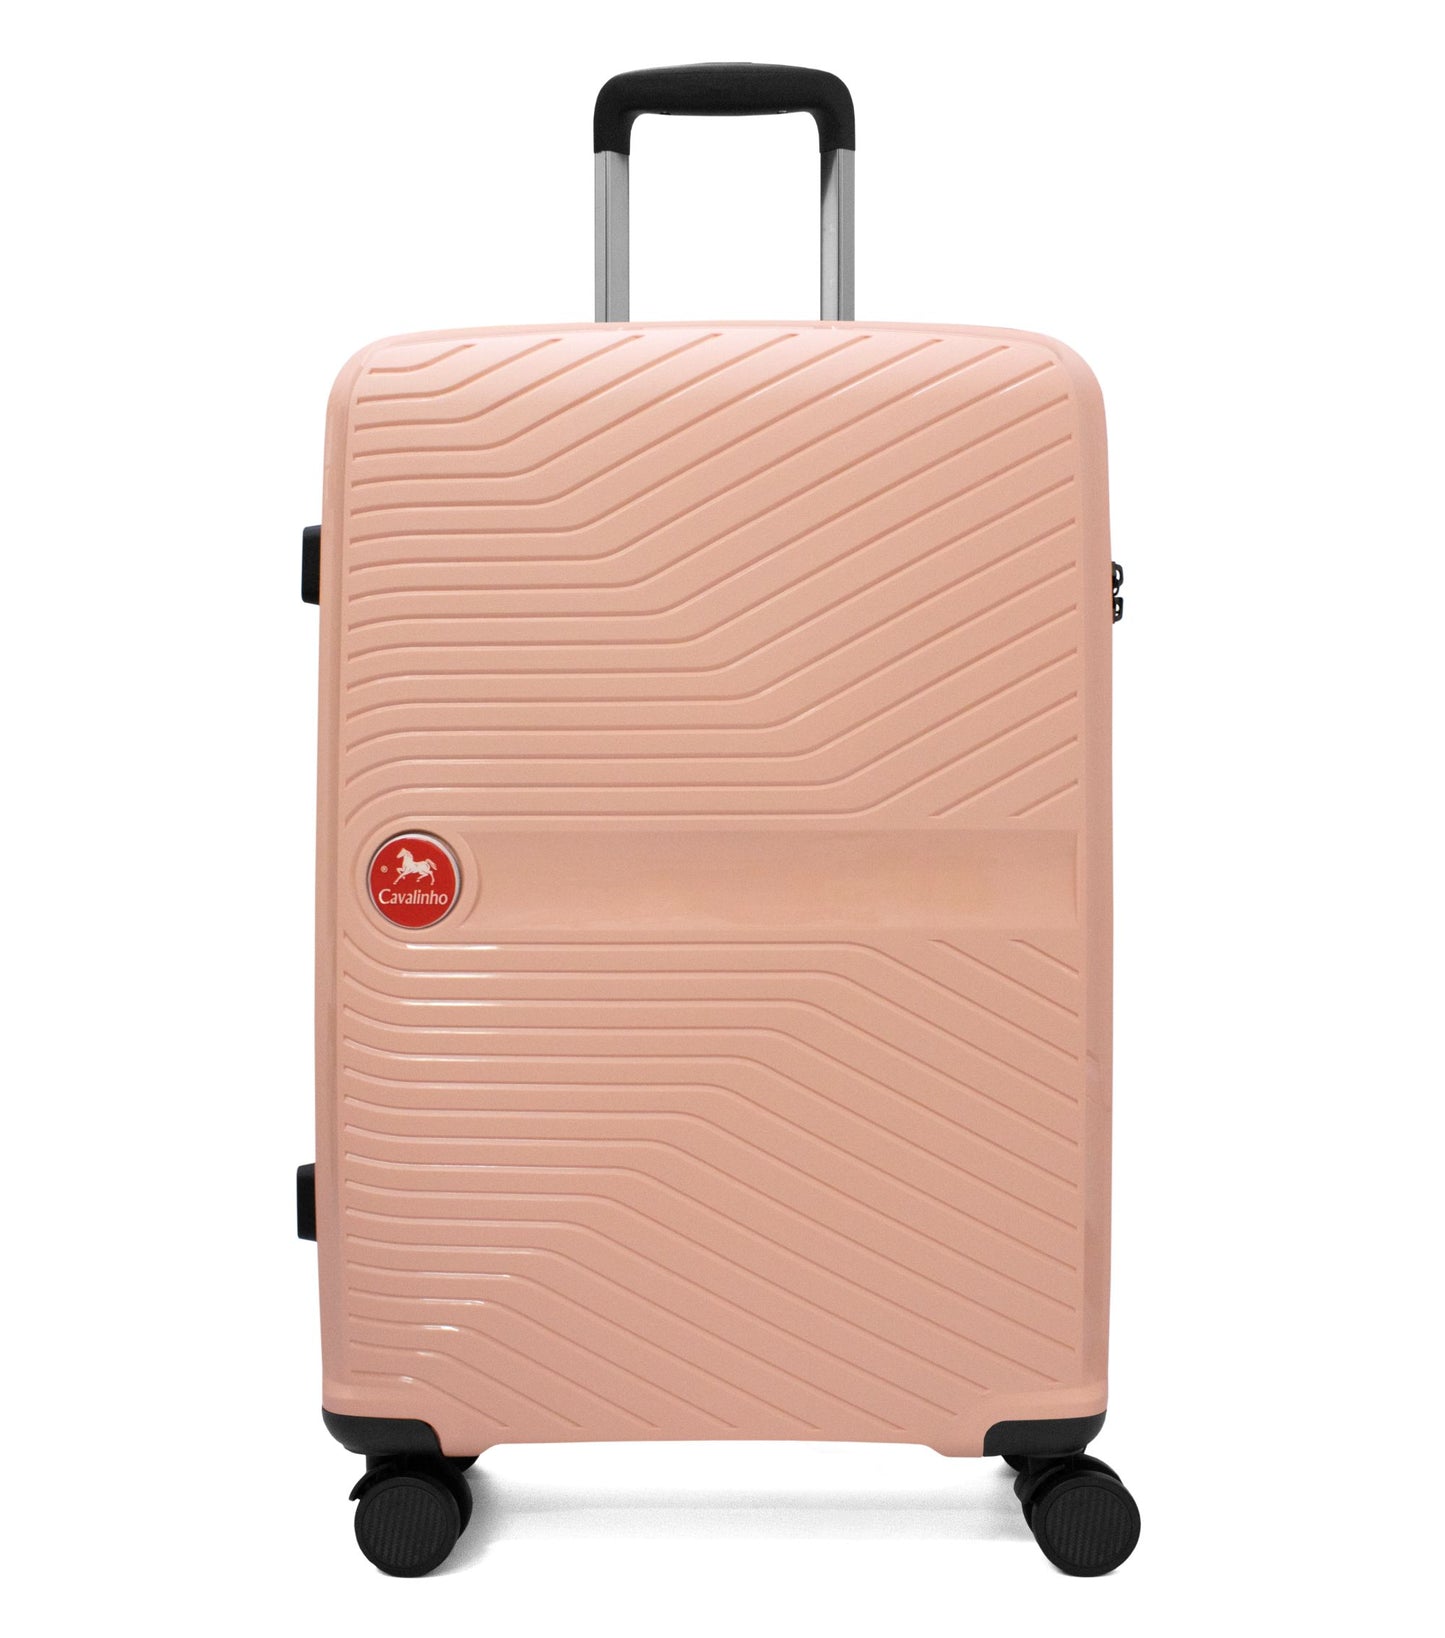 Cavalinho Colorful Check-in Hardside Luggage (24") - 24 inch Salmon - 68020004.11.24_1